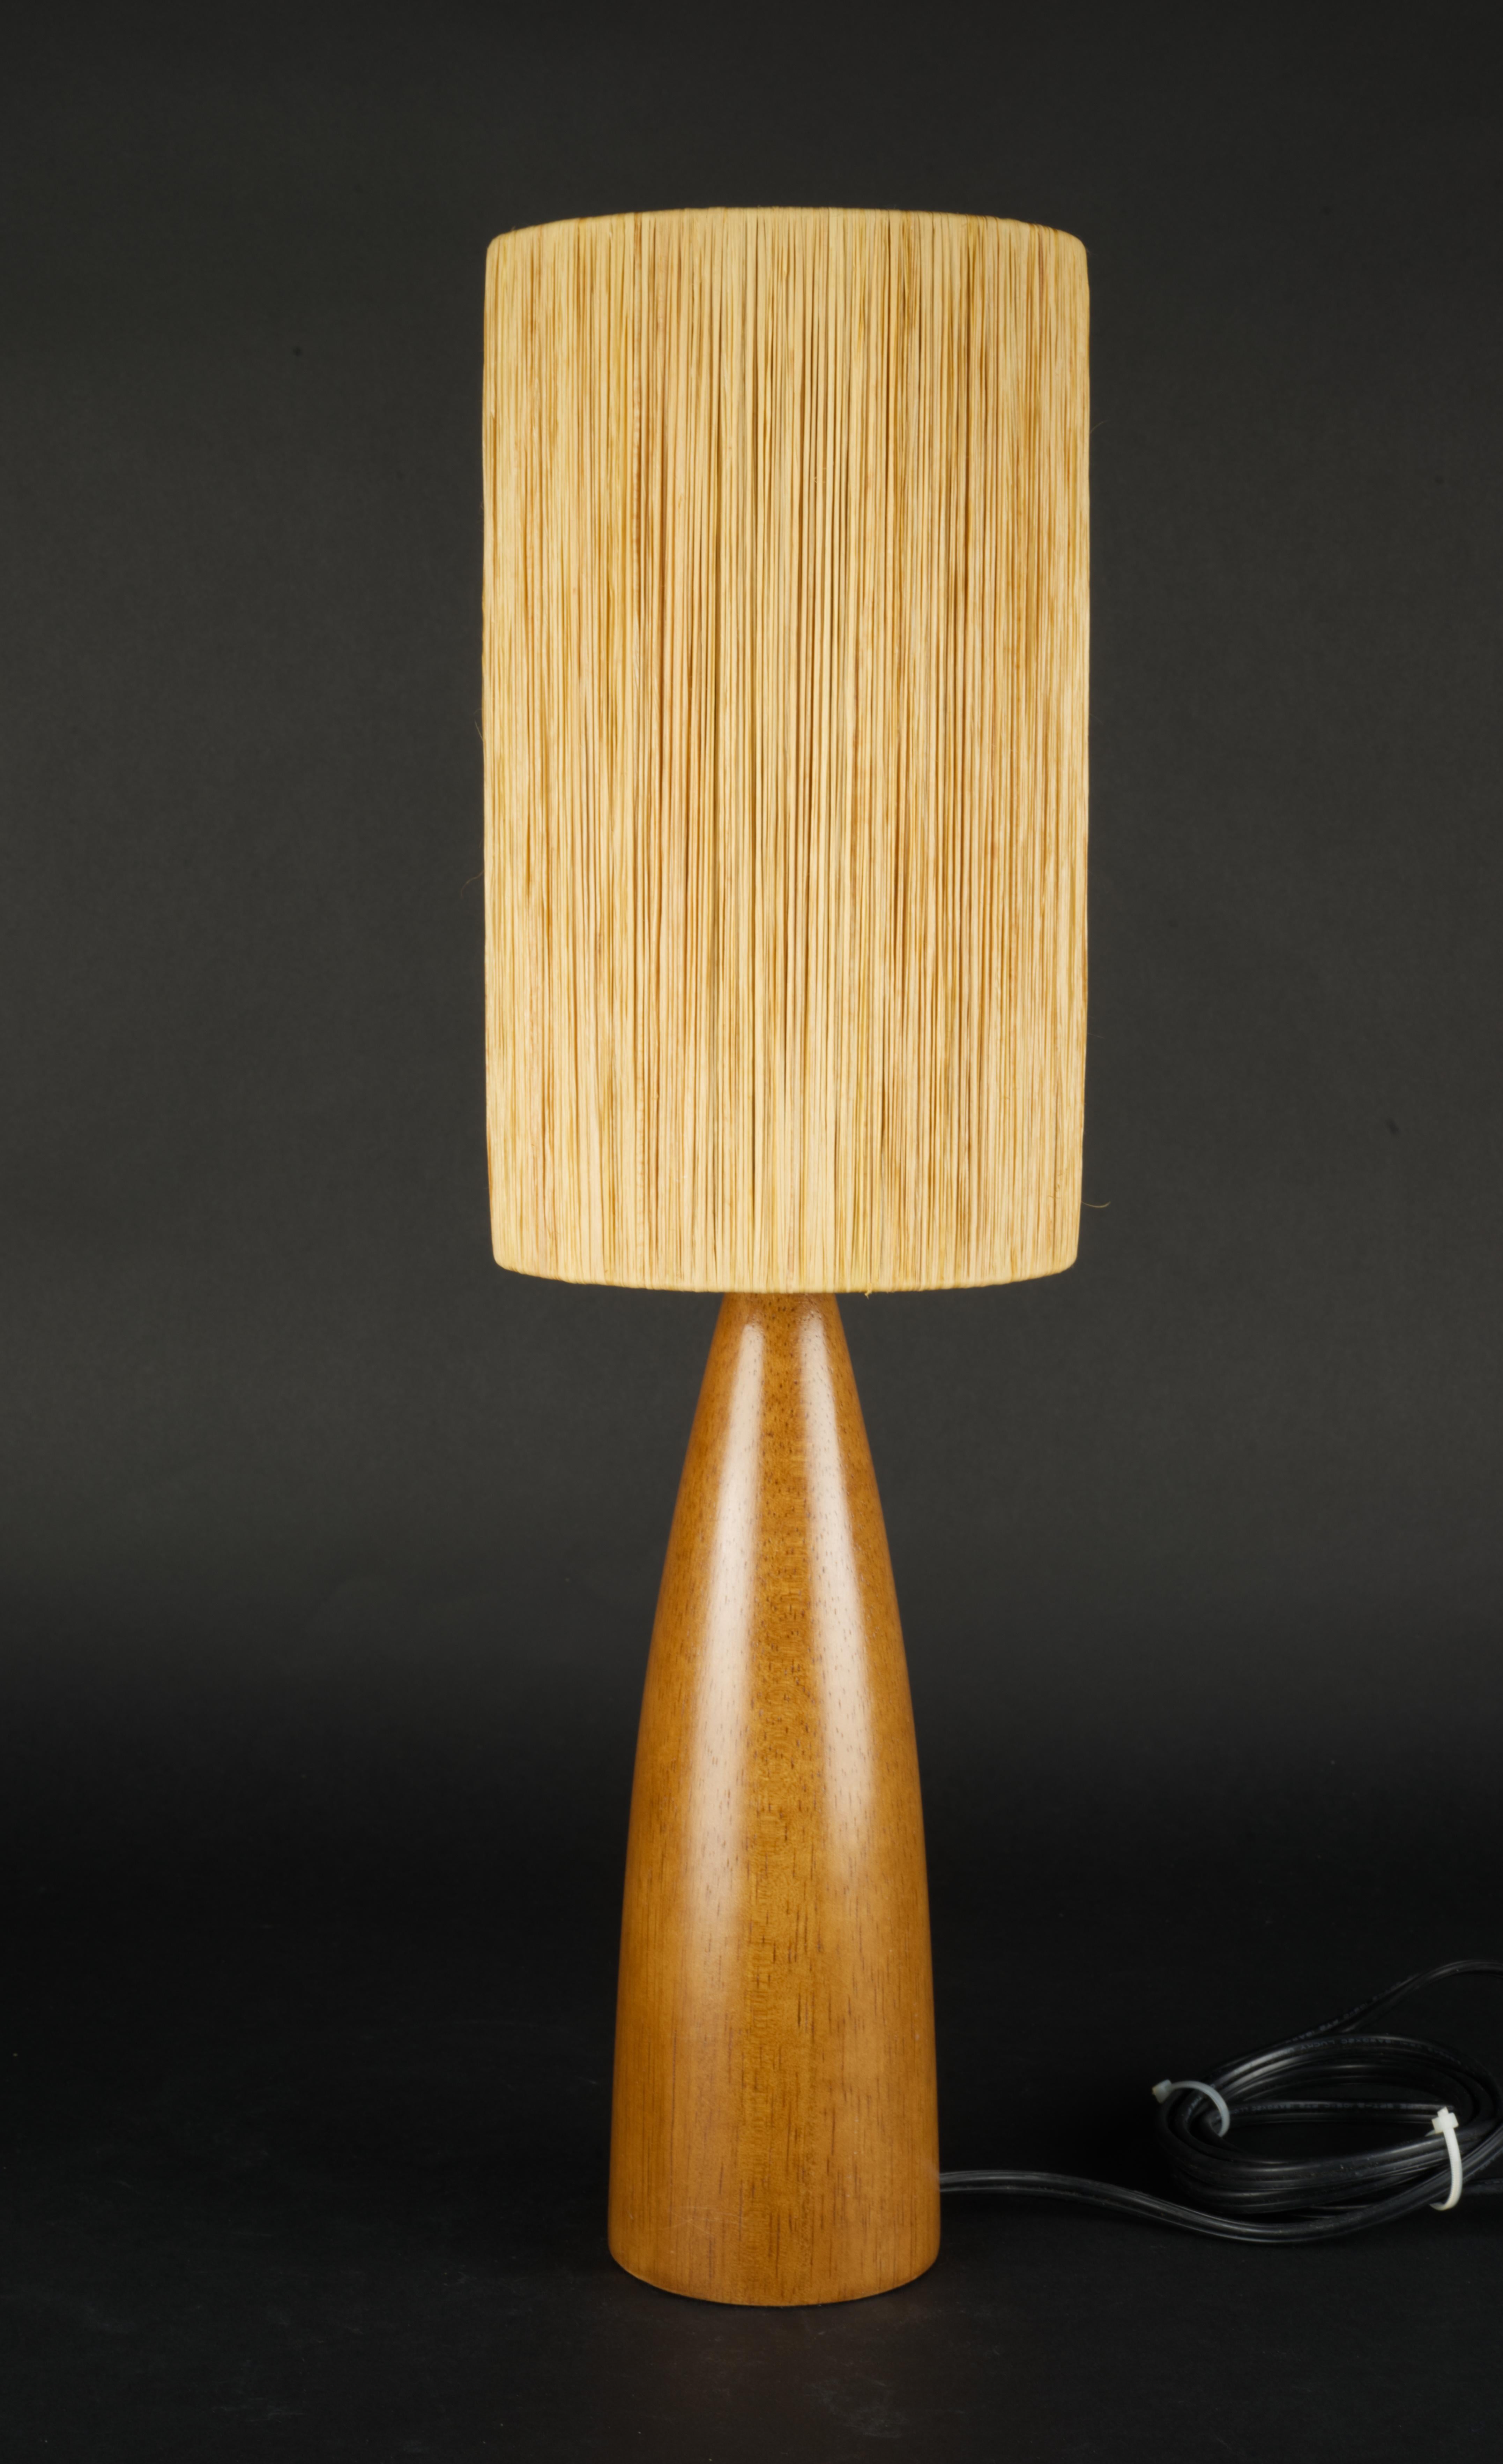 Scandinavian Modern Teak Accent Table Lamp with Original Straw Shade, Mid Centur For Sale 1